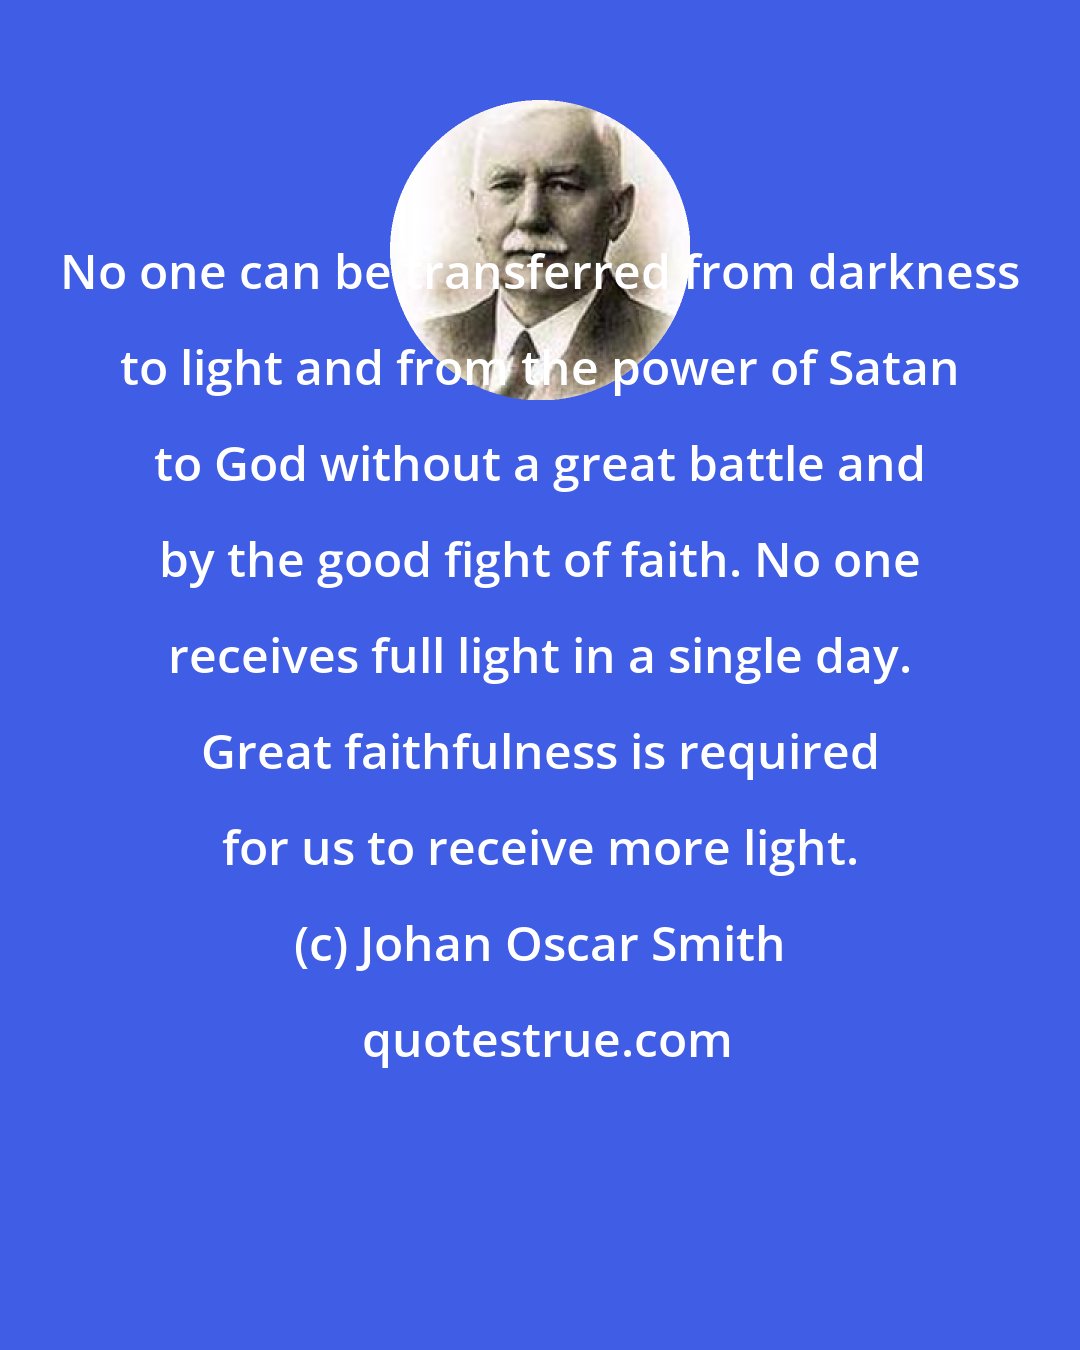 Johan Oscar Smith: No one can be transferred from darkness to light and from the power of Satan to God without a great battle and by the good fight of faith. No one receives full light in a single day. Great faithfulness is required for us to receive more light.